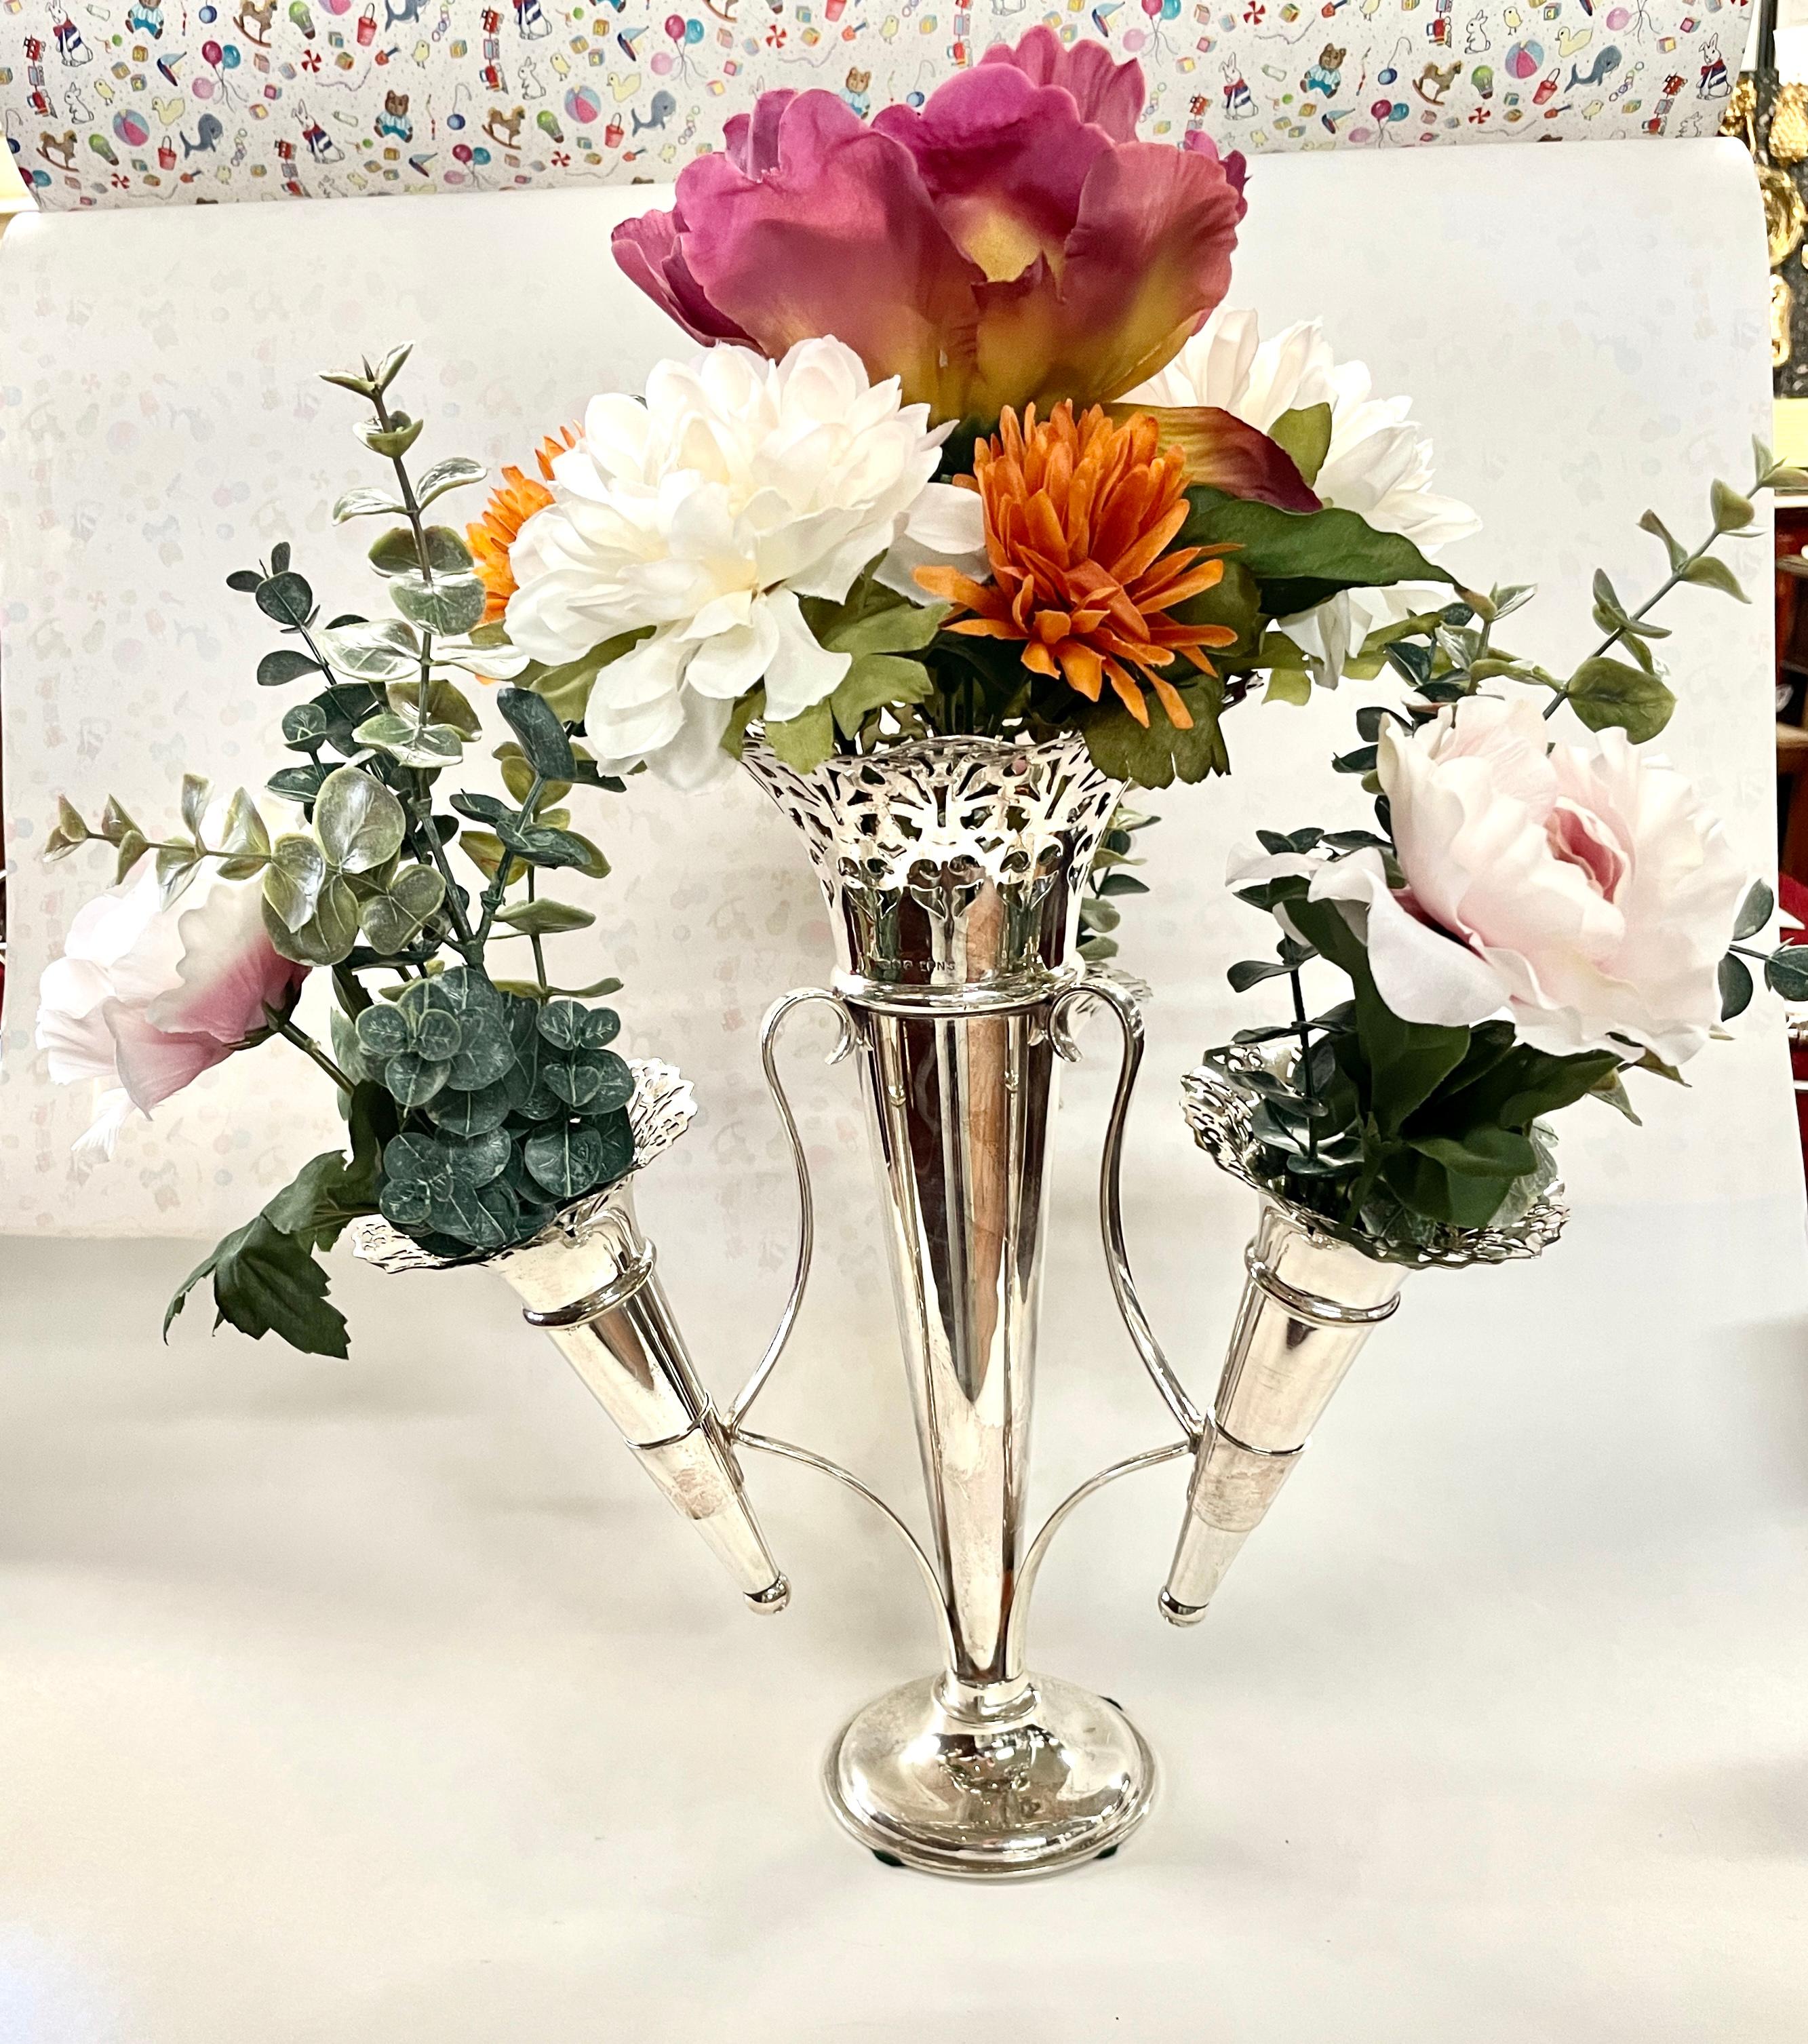 This gorgeous Antique English silver plated four-tube Floral Epergne (Centerpiece) is in pristine condition with no plate loss whatsoever.  The flange of each trumpet-shaped tube is delicately hand pierced.  There are maker's marks on the base for